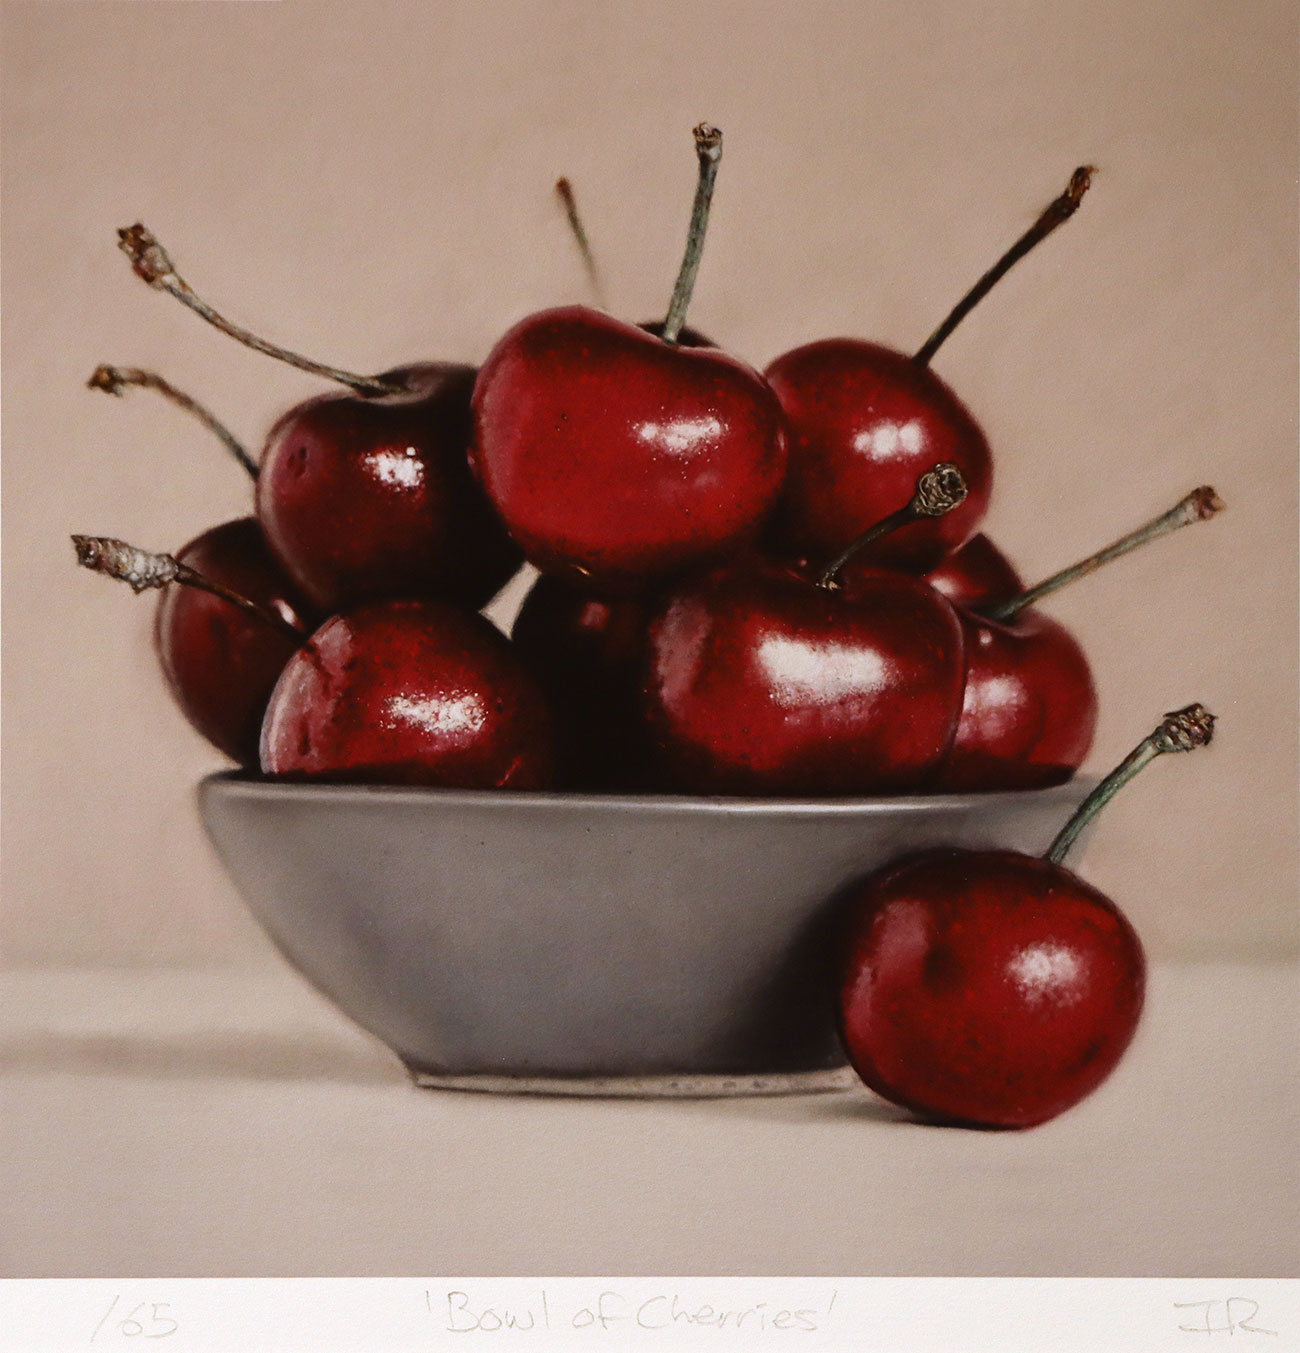 Ian Rawling, Signed limited edition print, Bowl of Cherries Click to enlarge